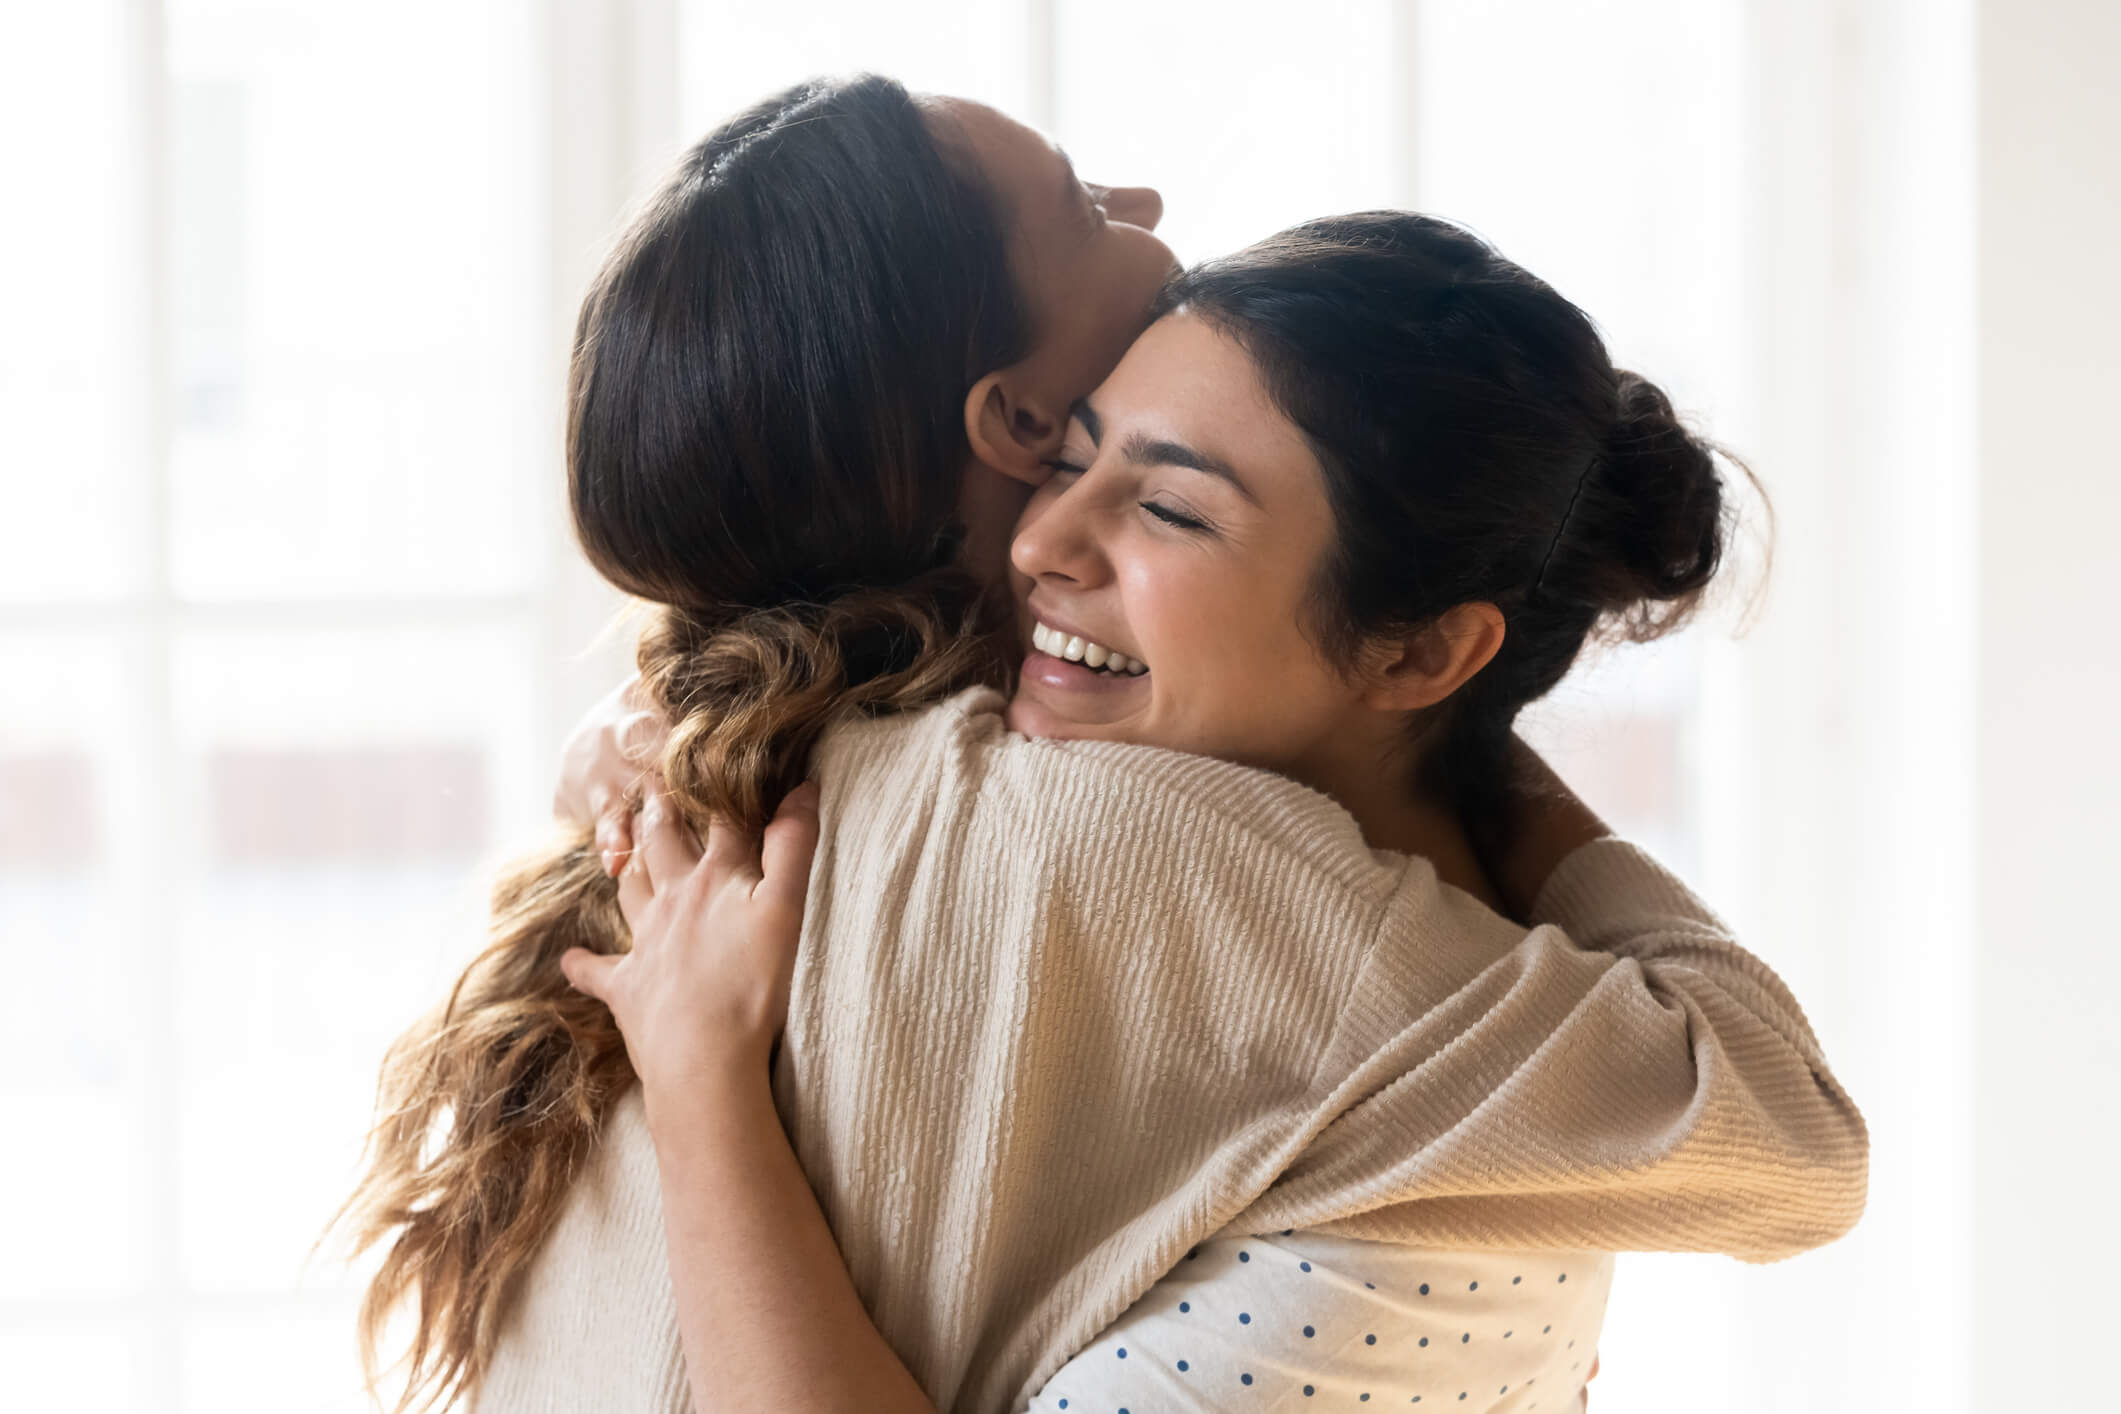 Woman hugs her sister after deciding to be her surrogate. The surrogacy cost of using a family member can help families build their family.